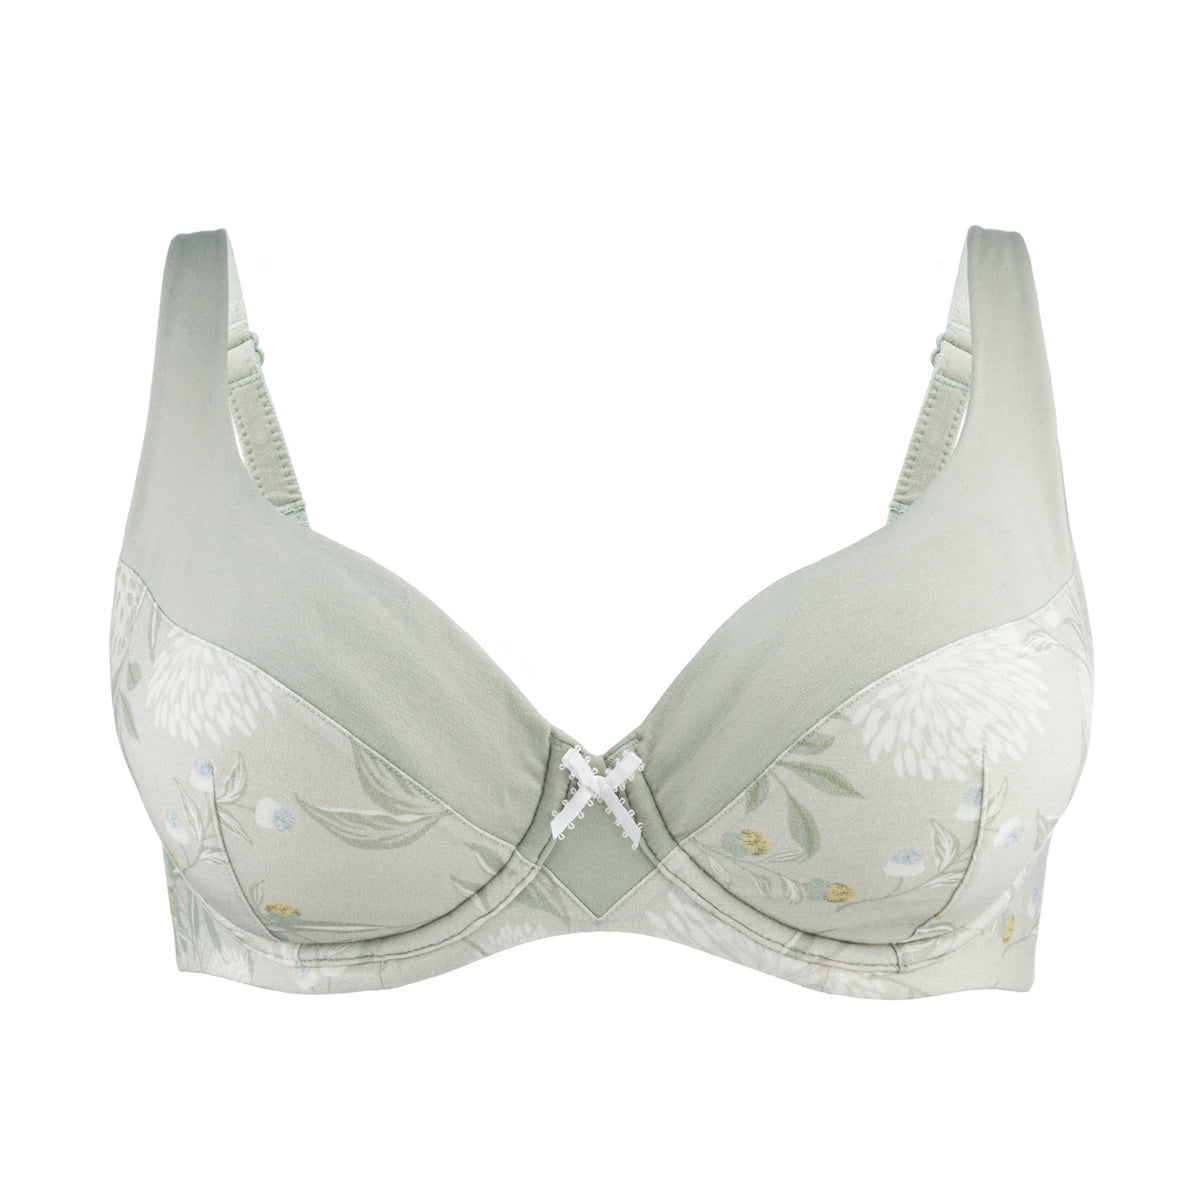 Anti- Allergic Bra - Everything You Need To Know & Why You Need It